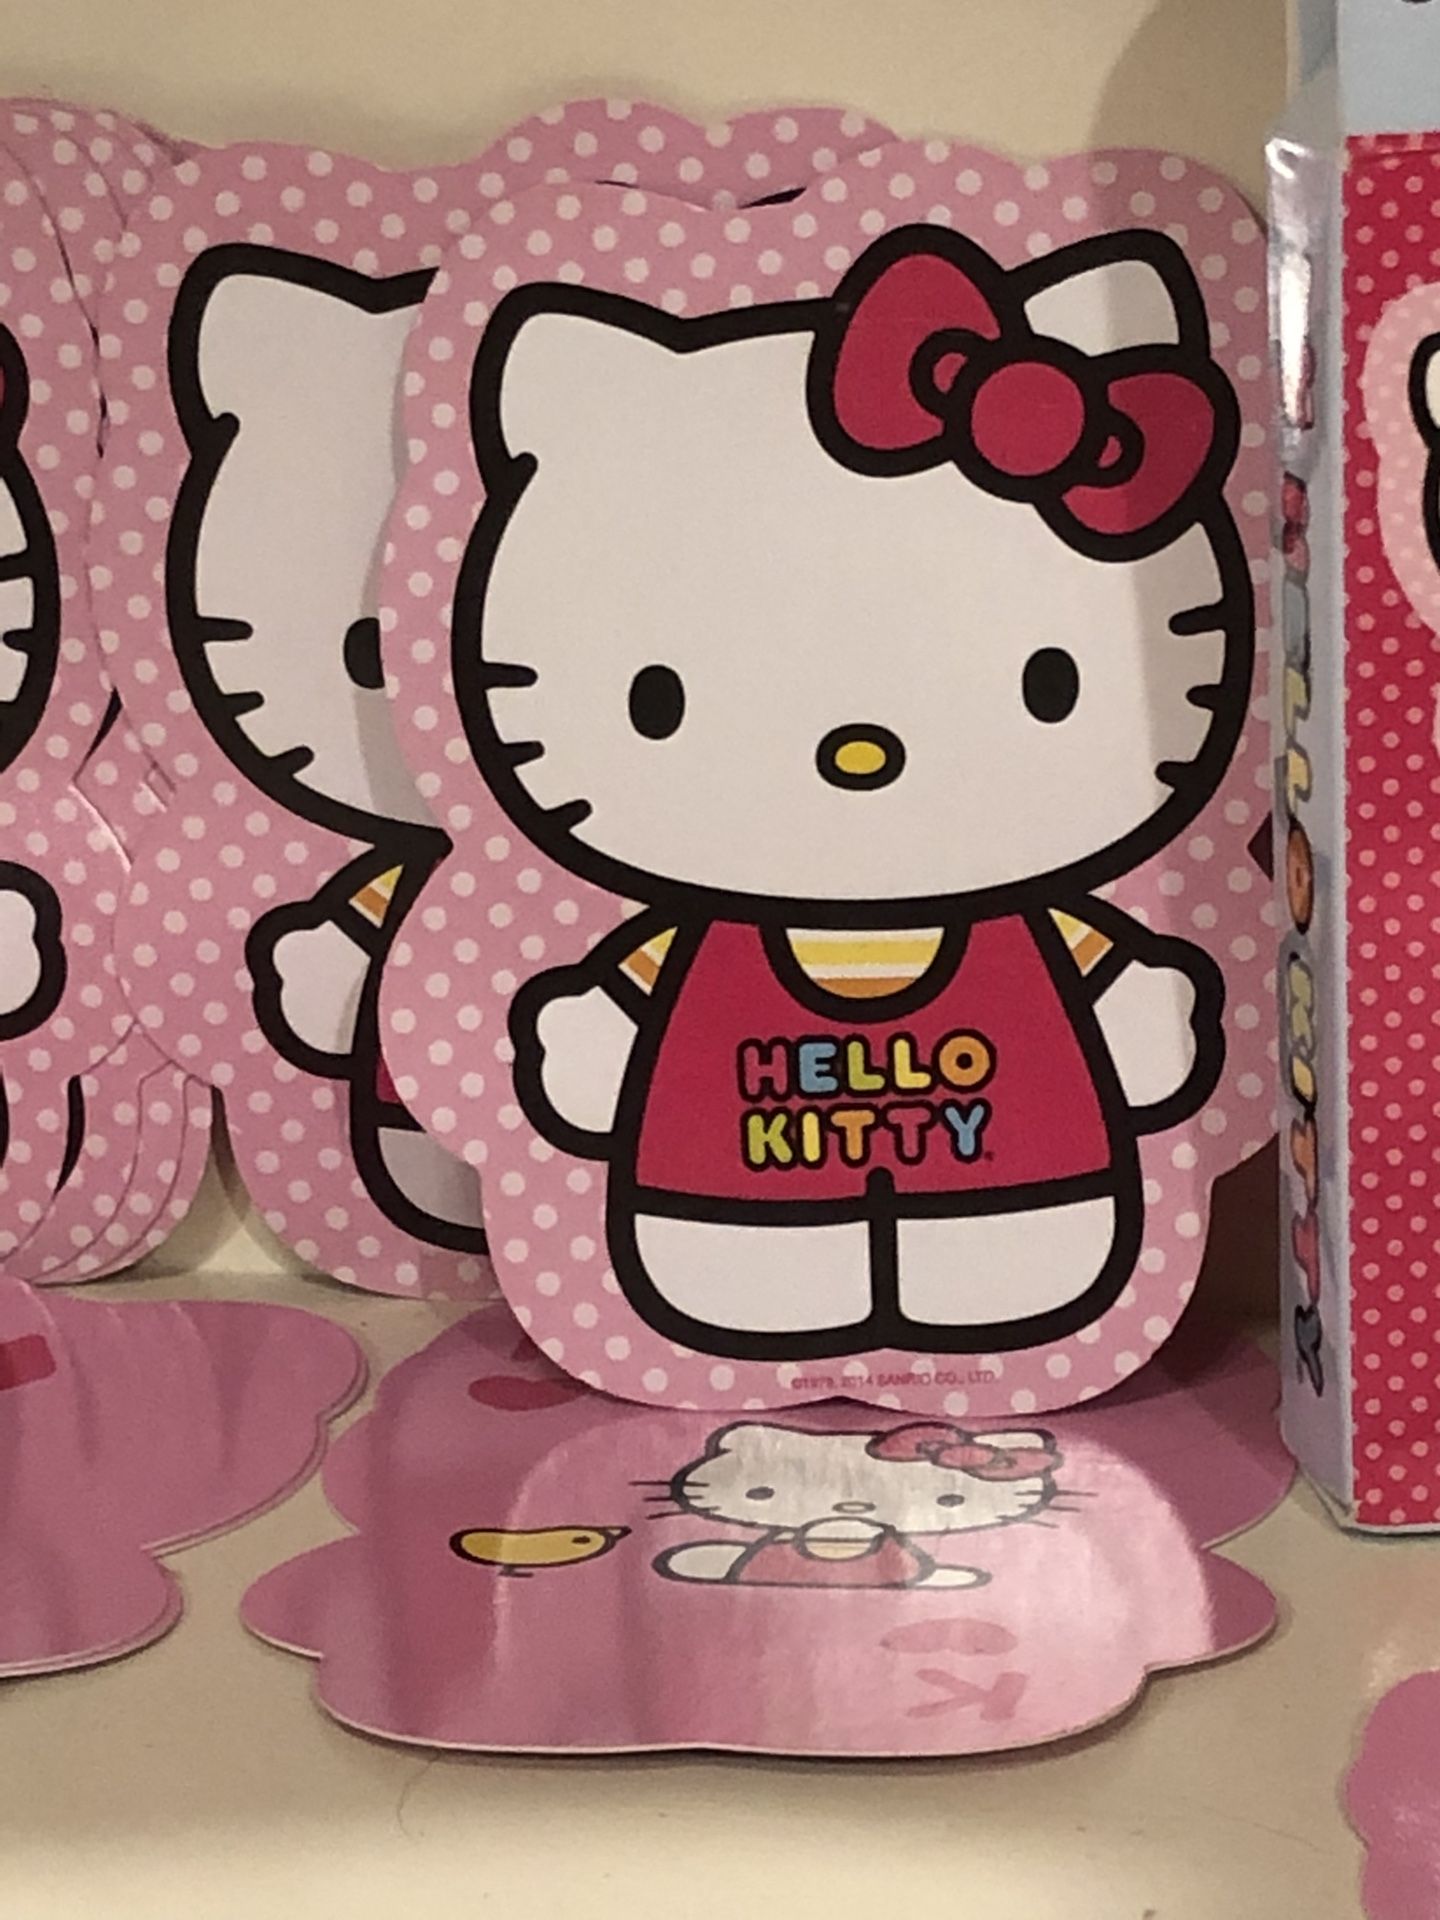 Hello Kitty shapes playing cards - full deck! Free gift with purchase!